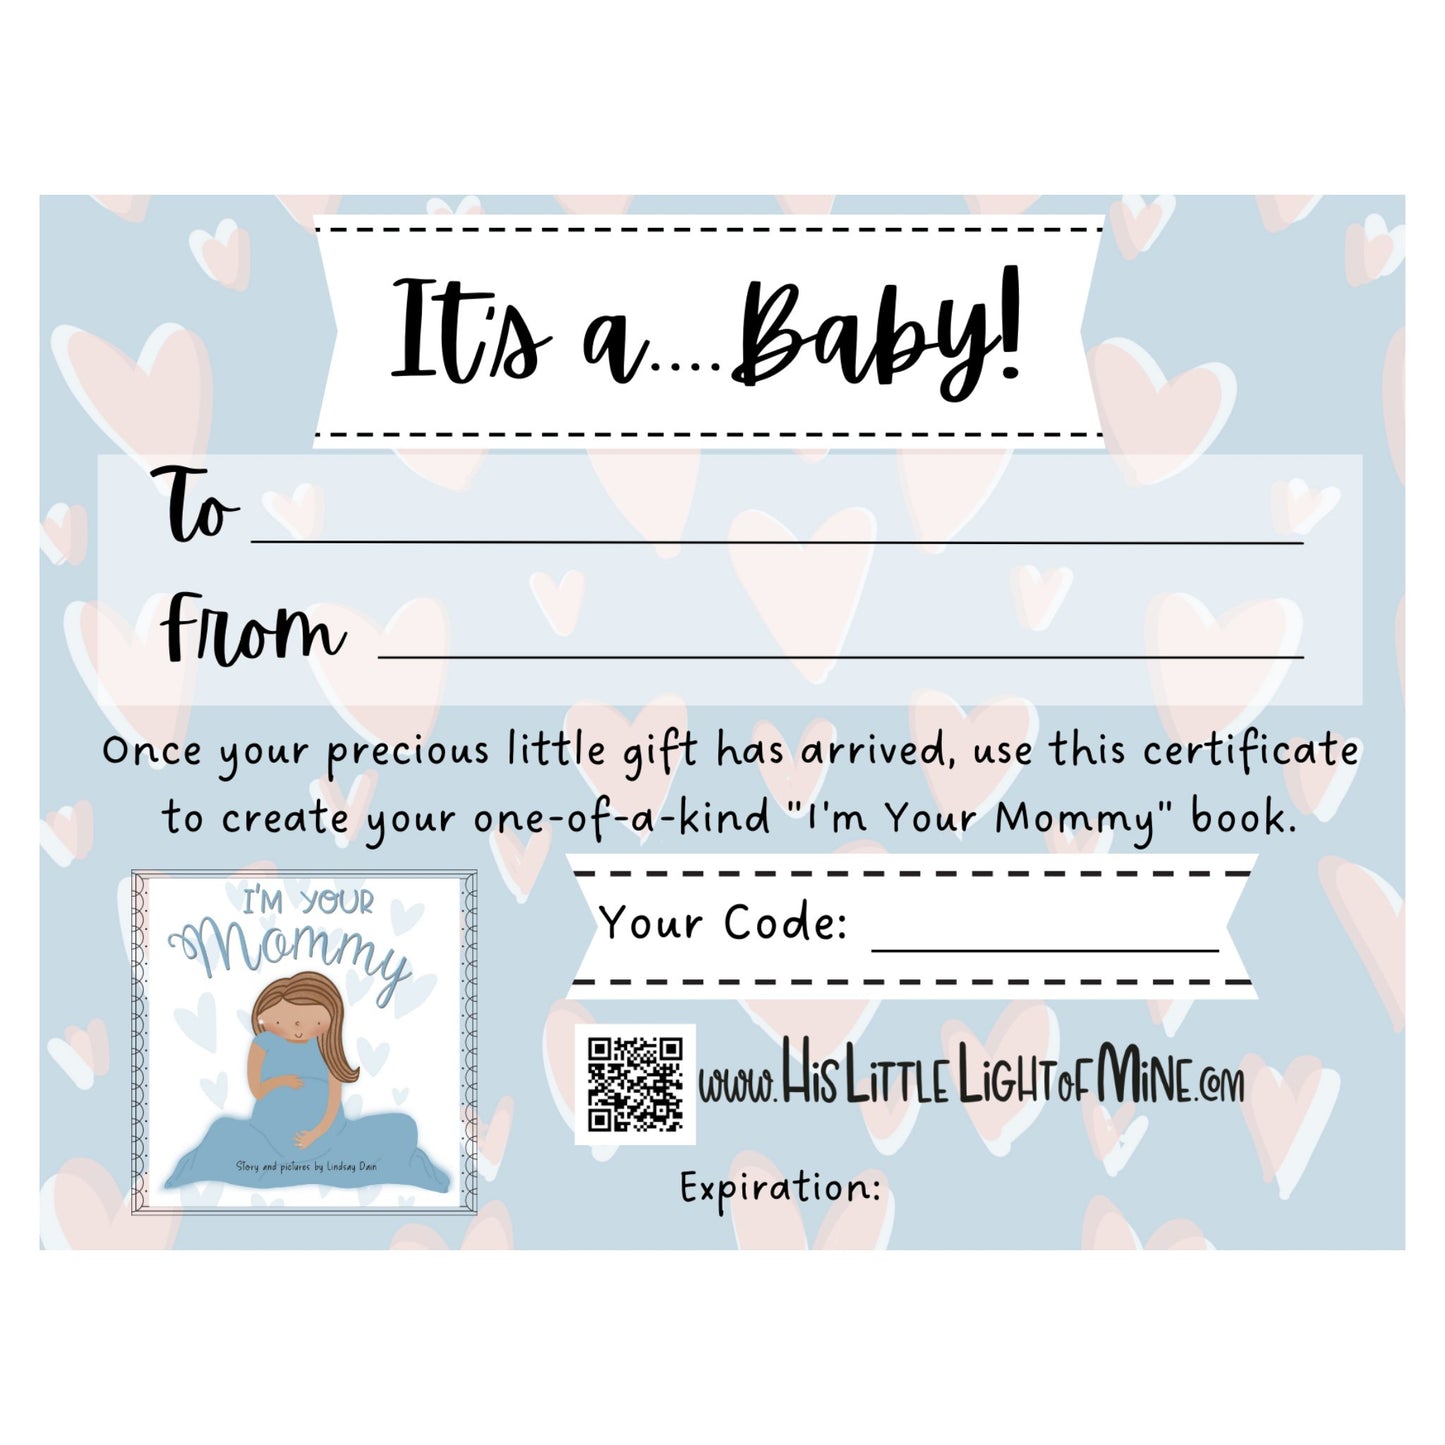 The self-published children’s picture book “I’m Your Mommy” gift certificate image 